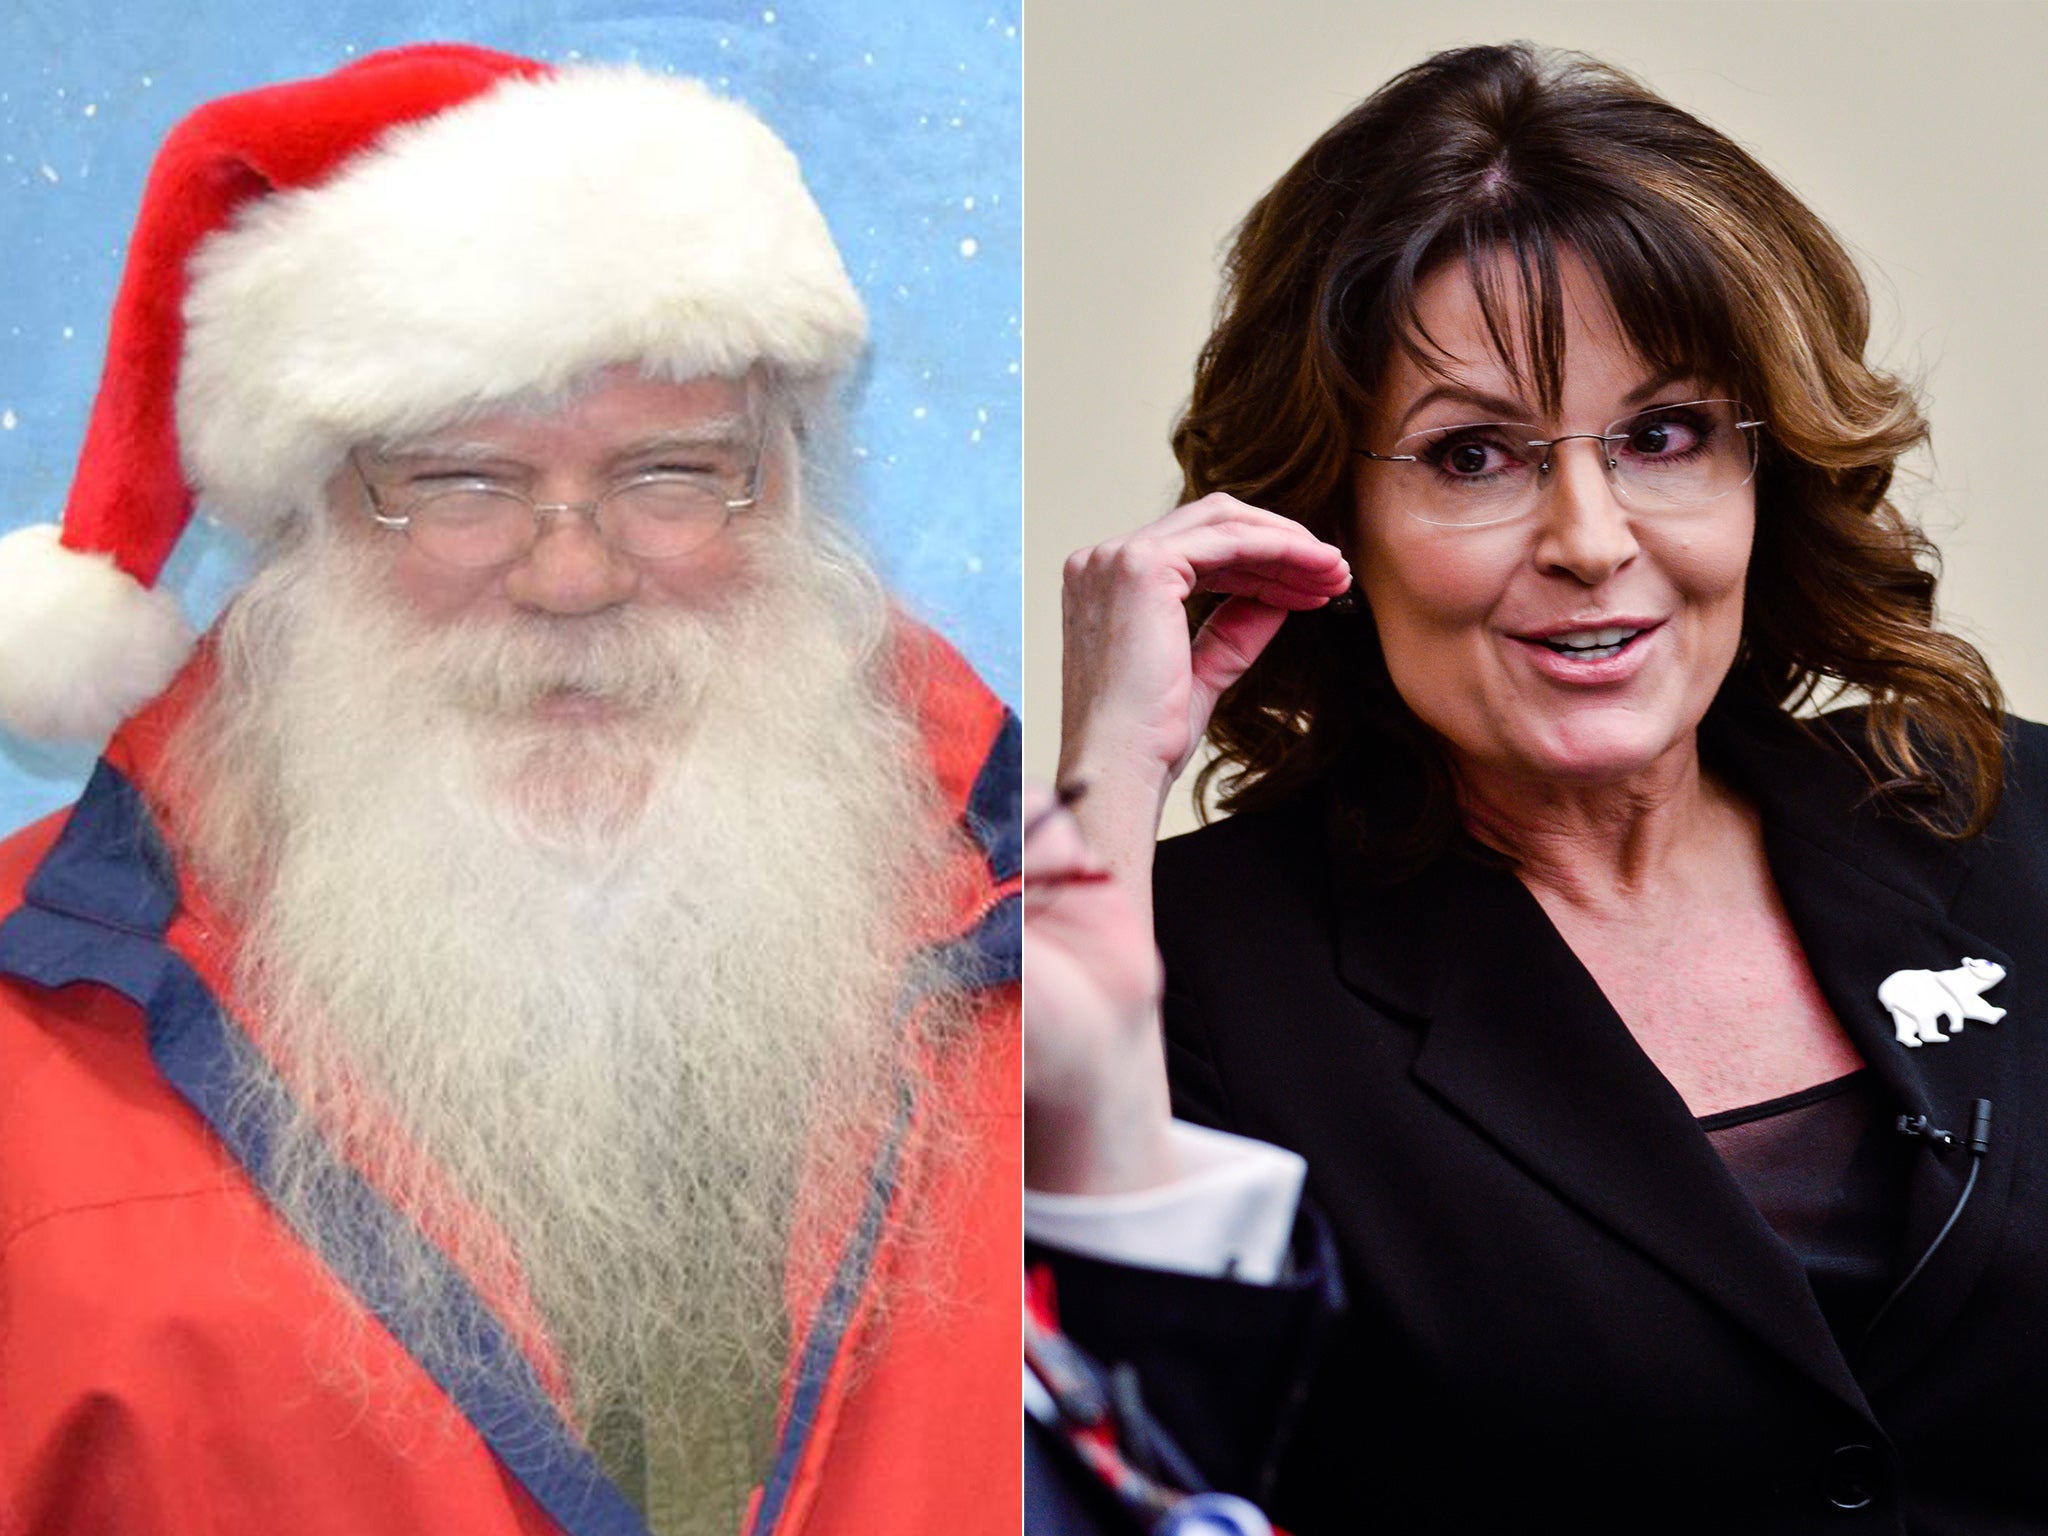 Santa Claus – who legally adopted the named 17 years ago – and Sarah Palin are among almost 50 candidates